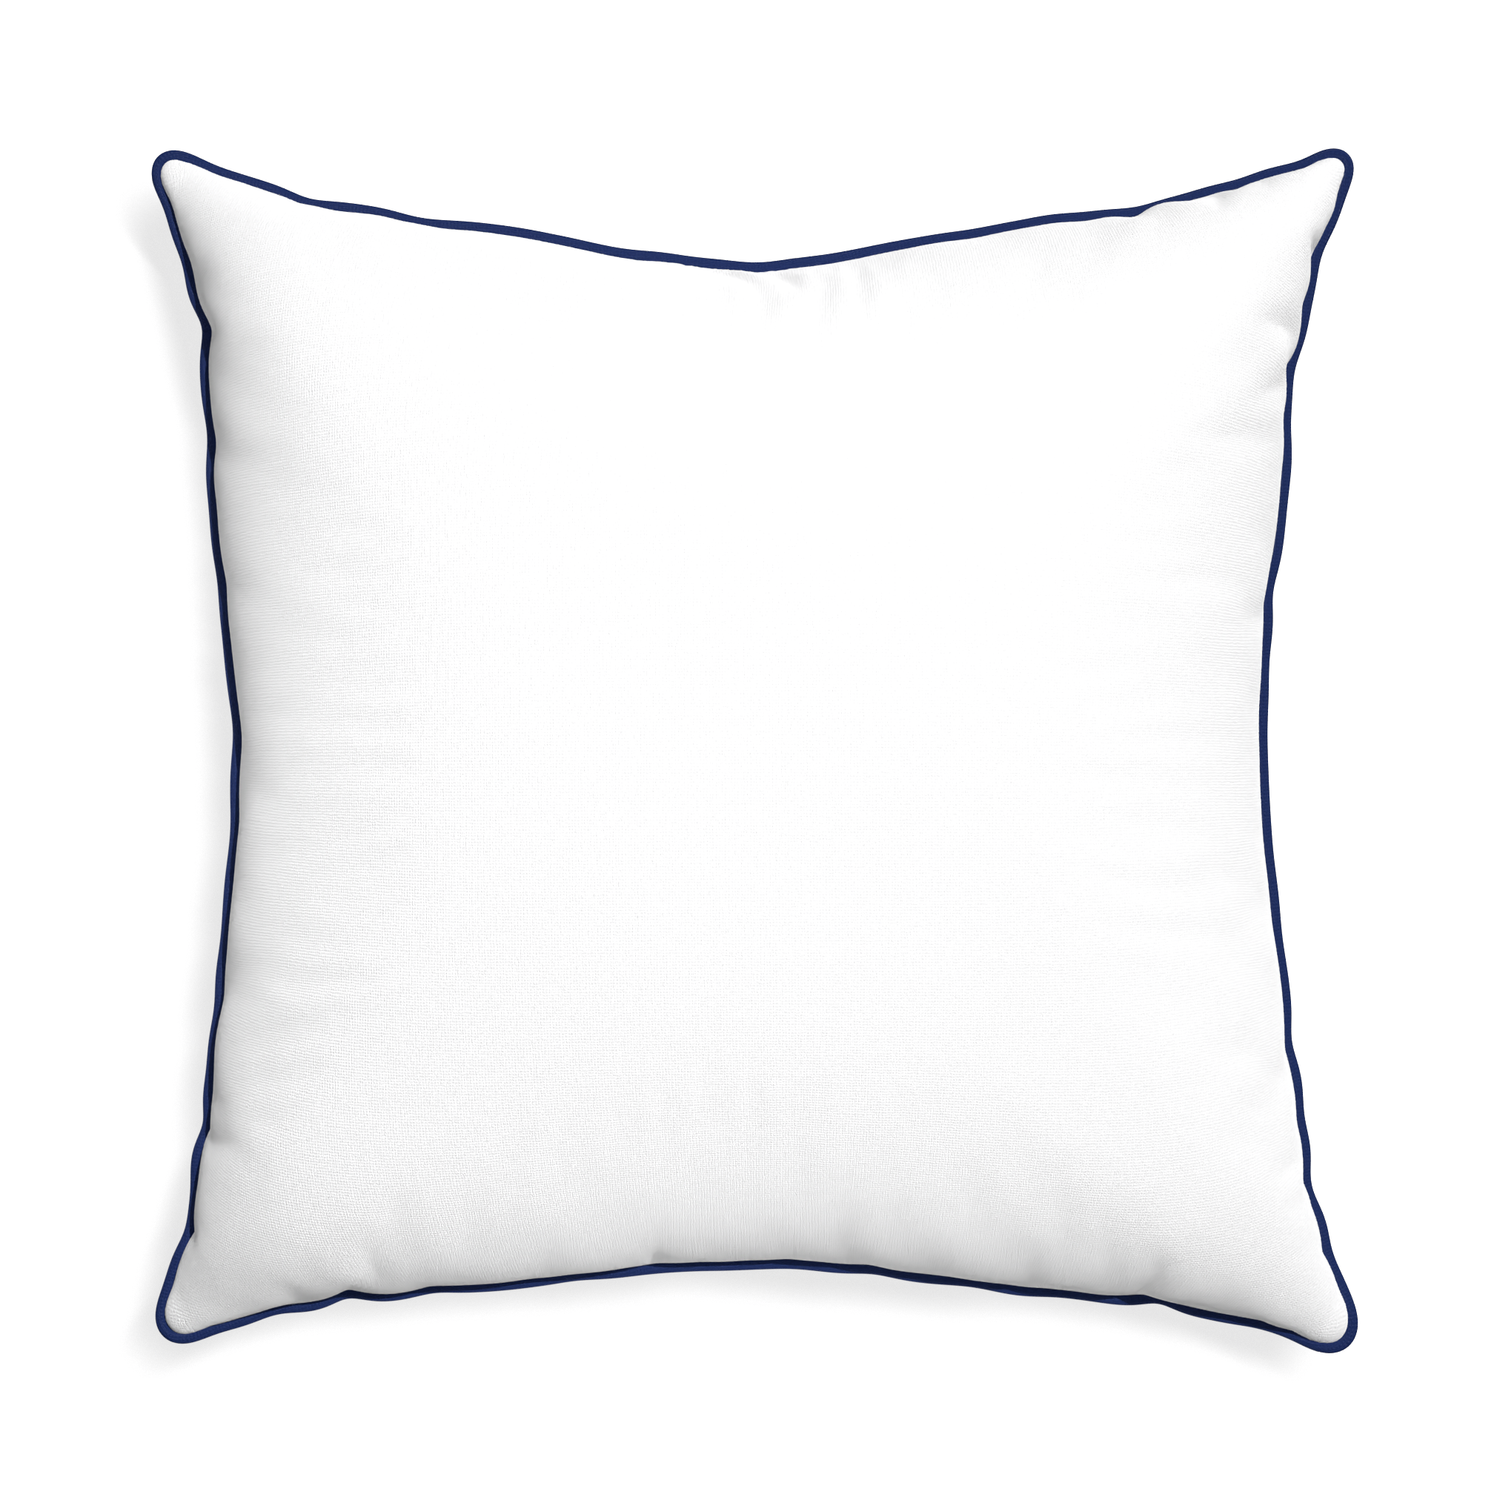 Euro-sham snow custom pillow with midnight piping on white background